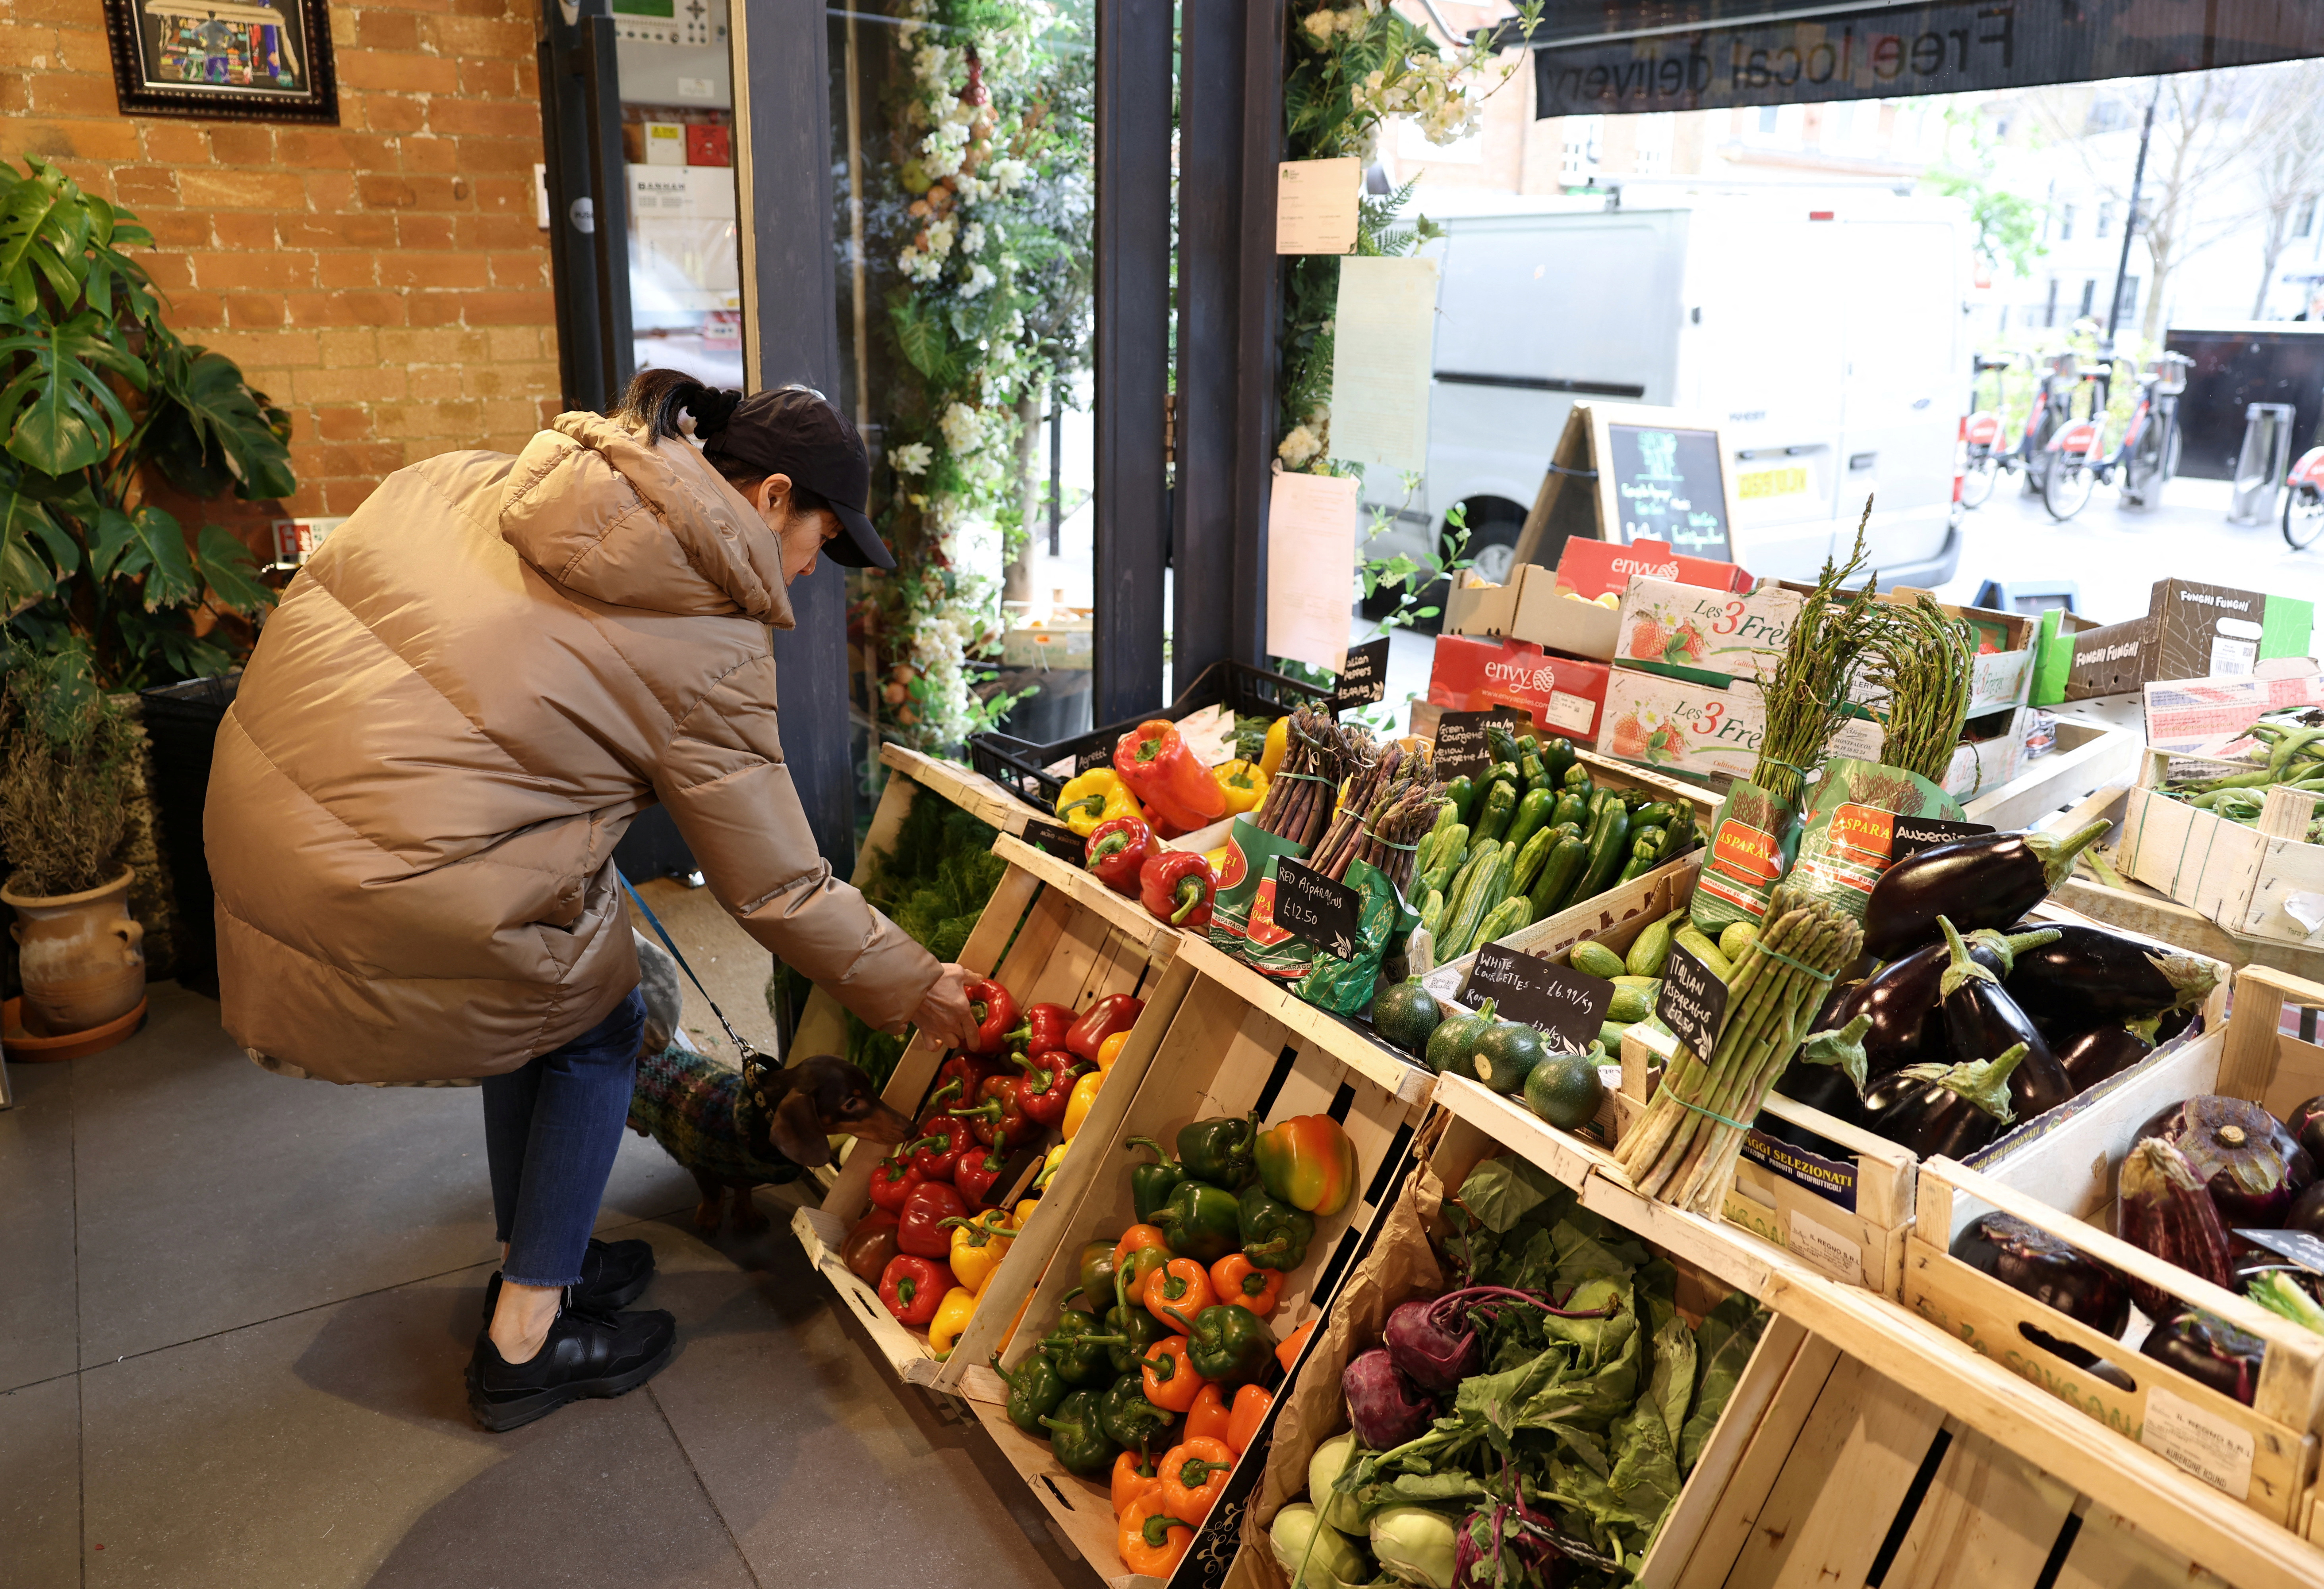 A customer shops for vegetables at gourmet grocery store Andreas, in London